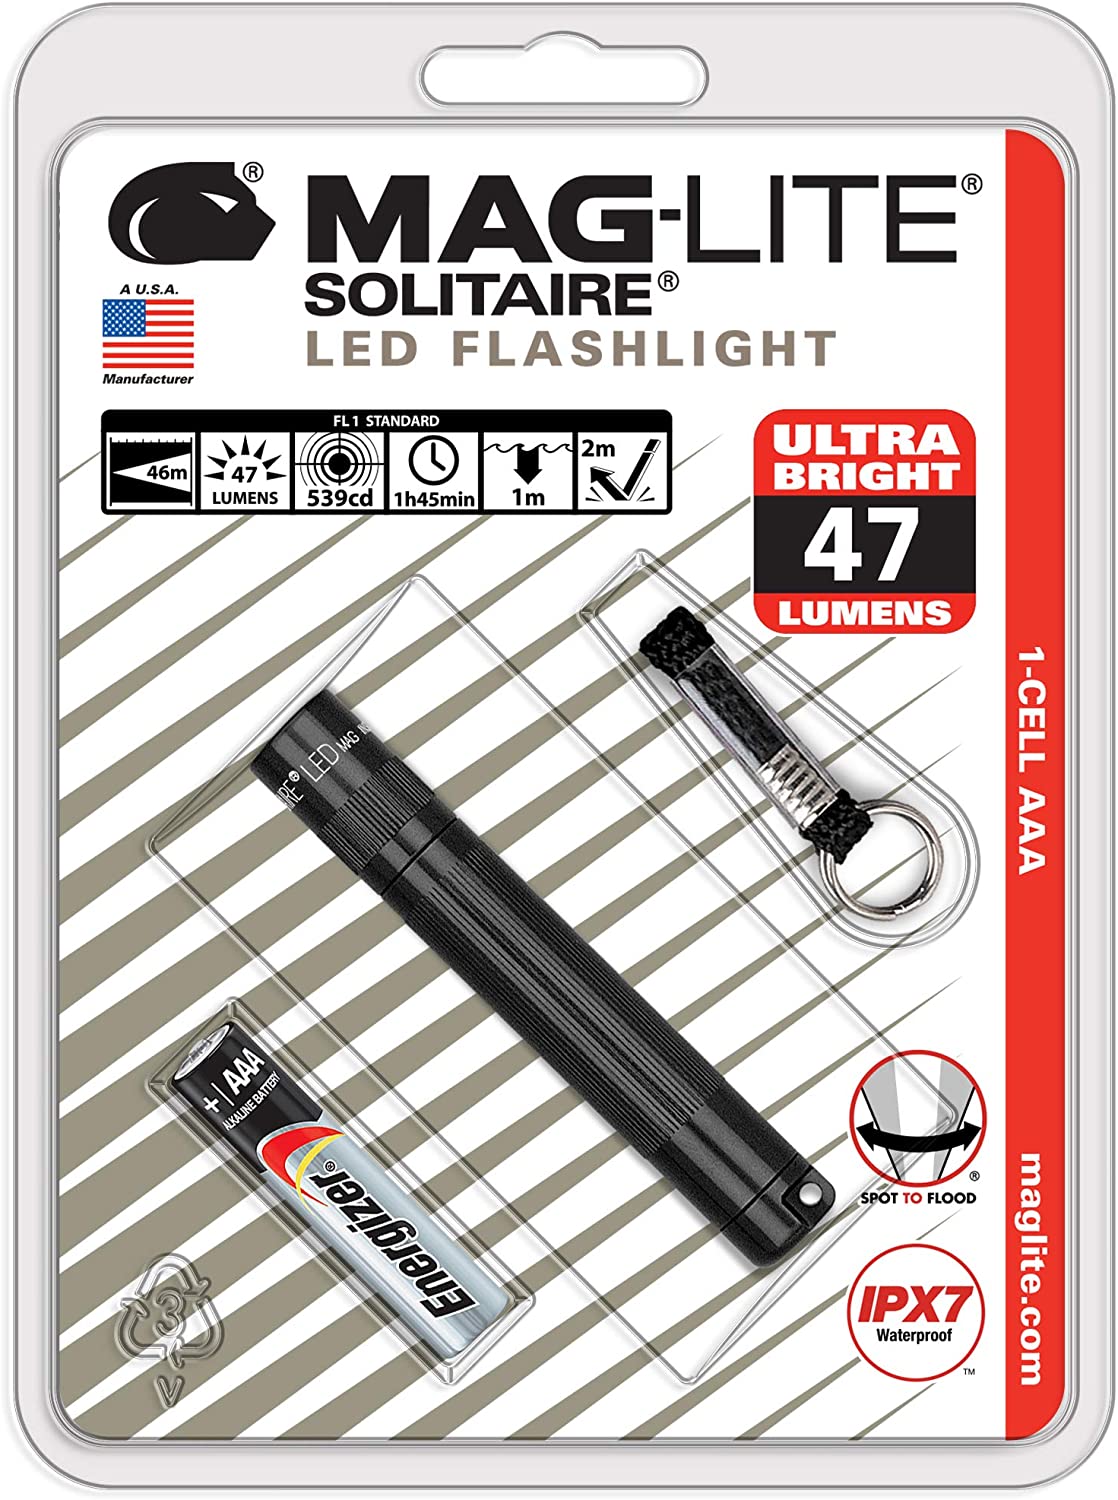 Maglite Solitaire Aaa 1 Cell Led